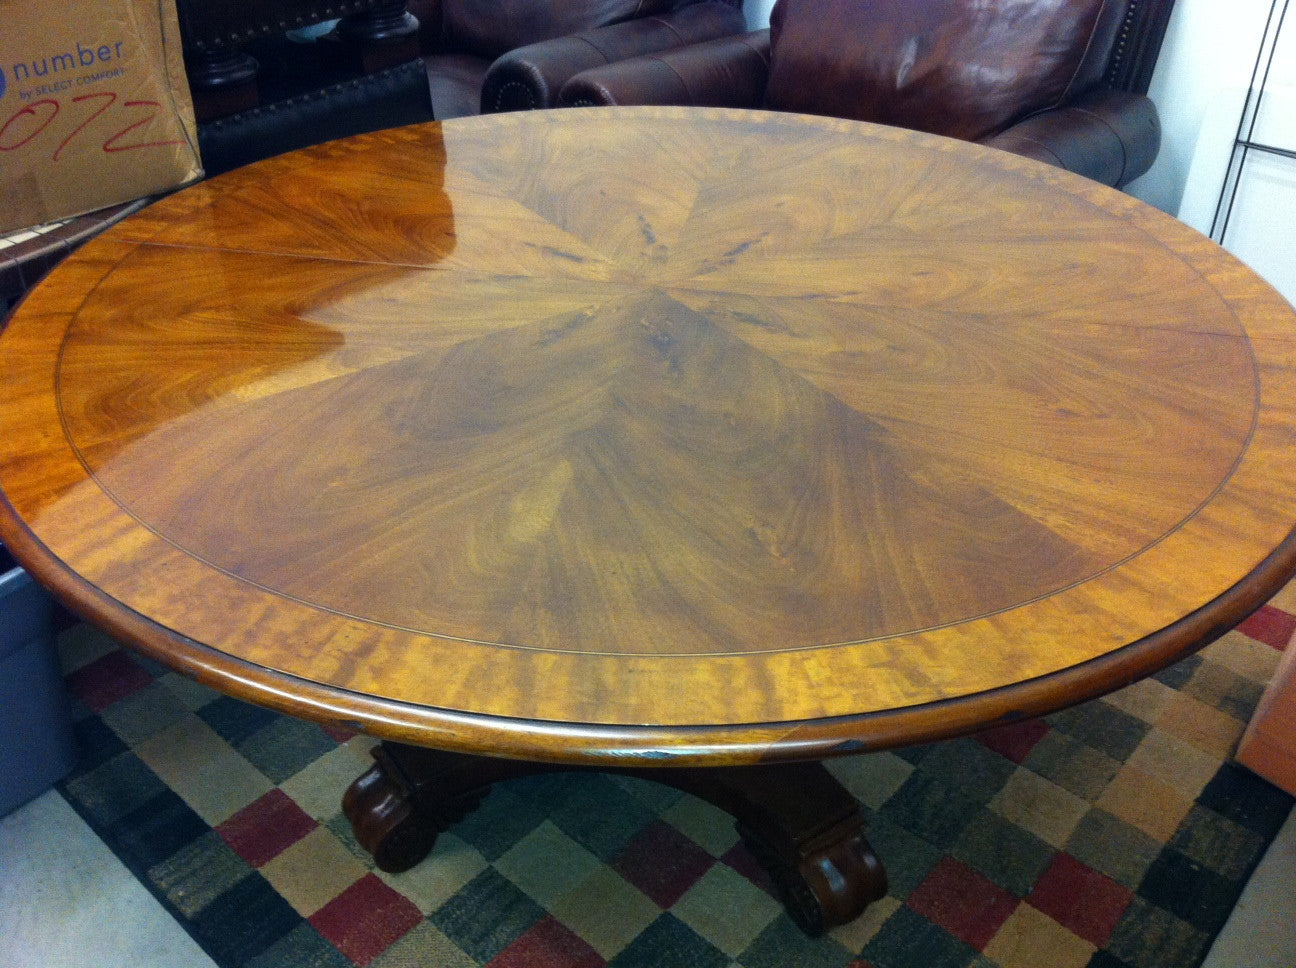 Awesome henredon round dining table Henredon Briars Dining Table Natchez Collection Floor Model Clink Furniture